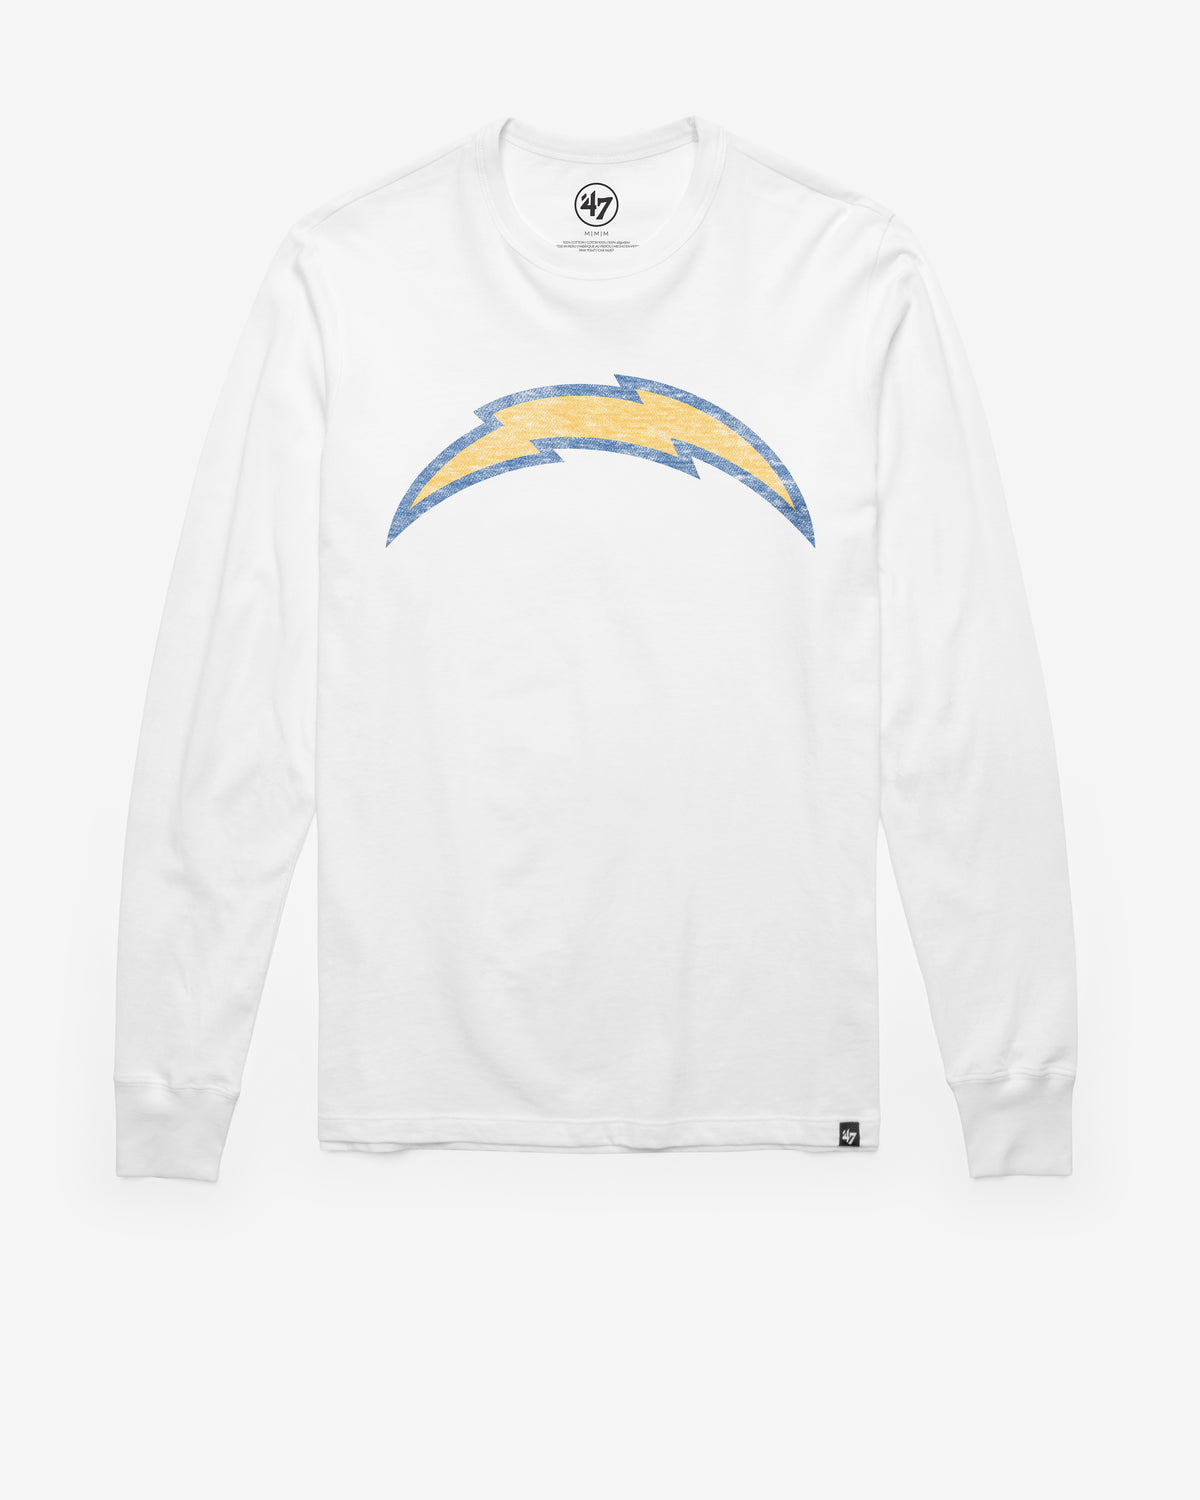 LOS ANGELES CHARGERS PREMIER '47 FRANKLIN LONG SLEEVE TEE